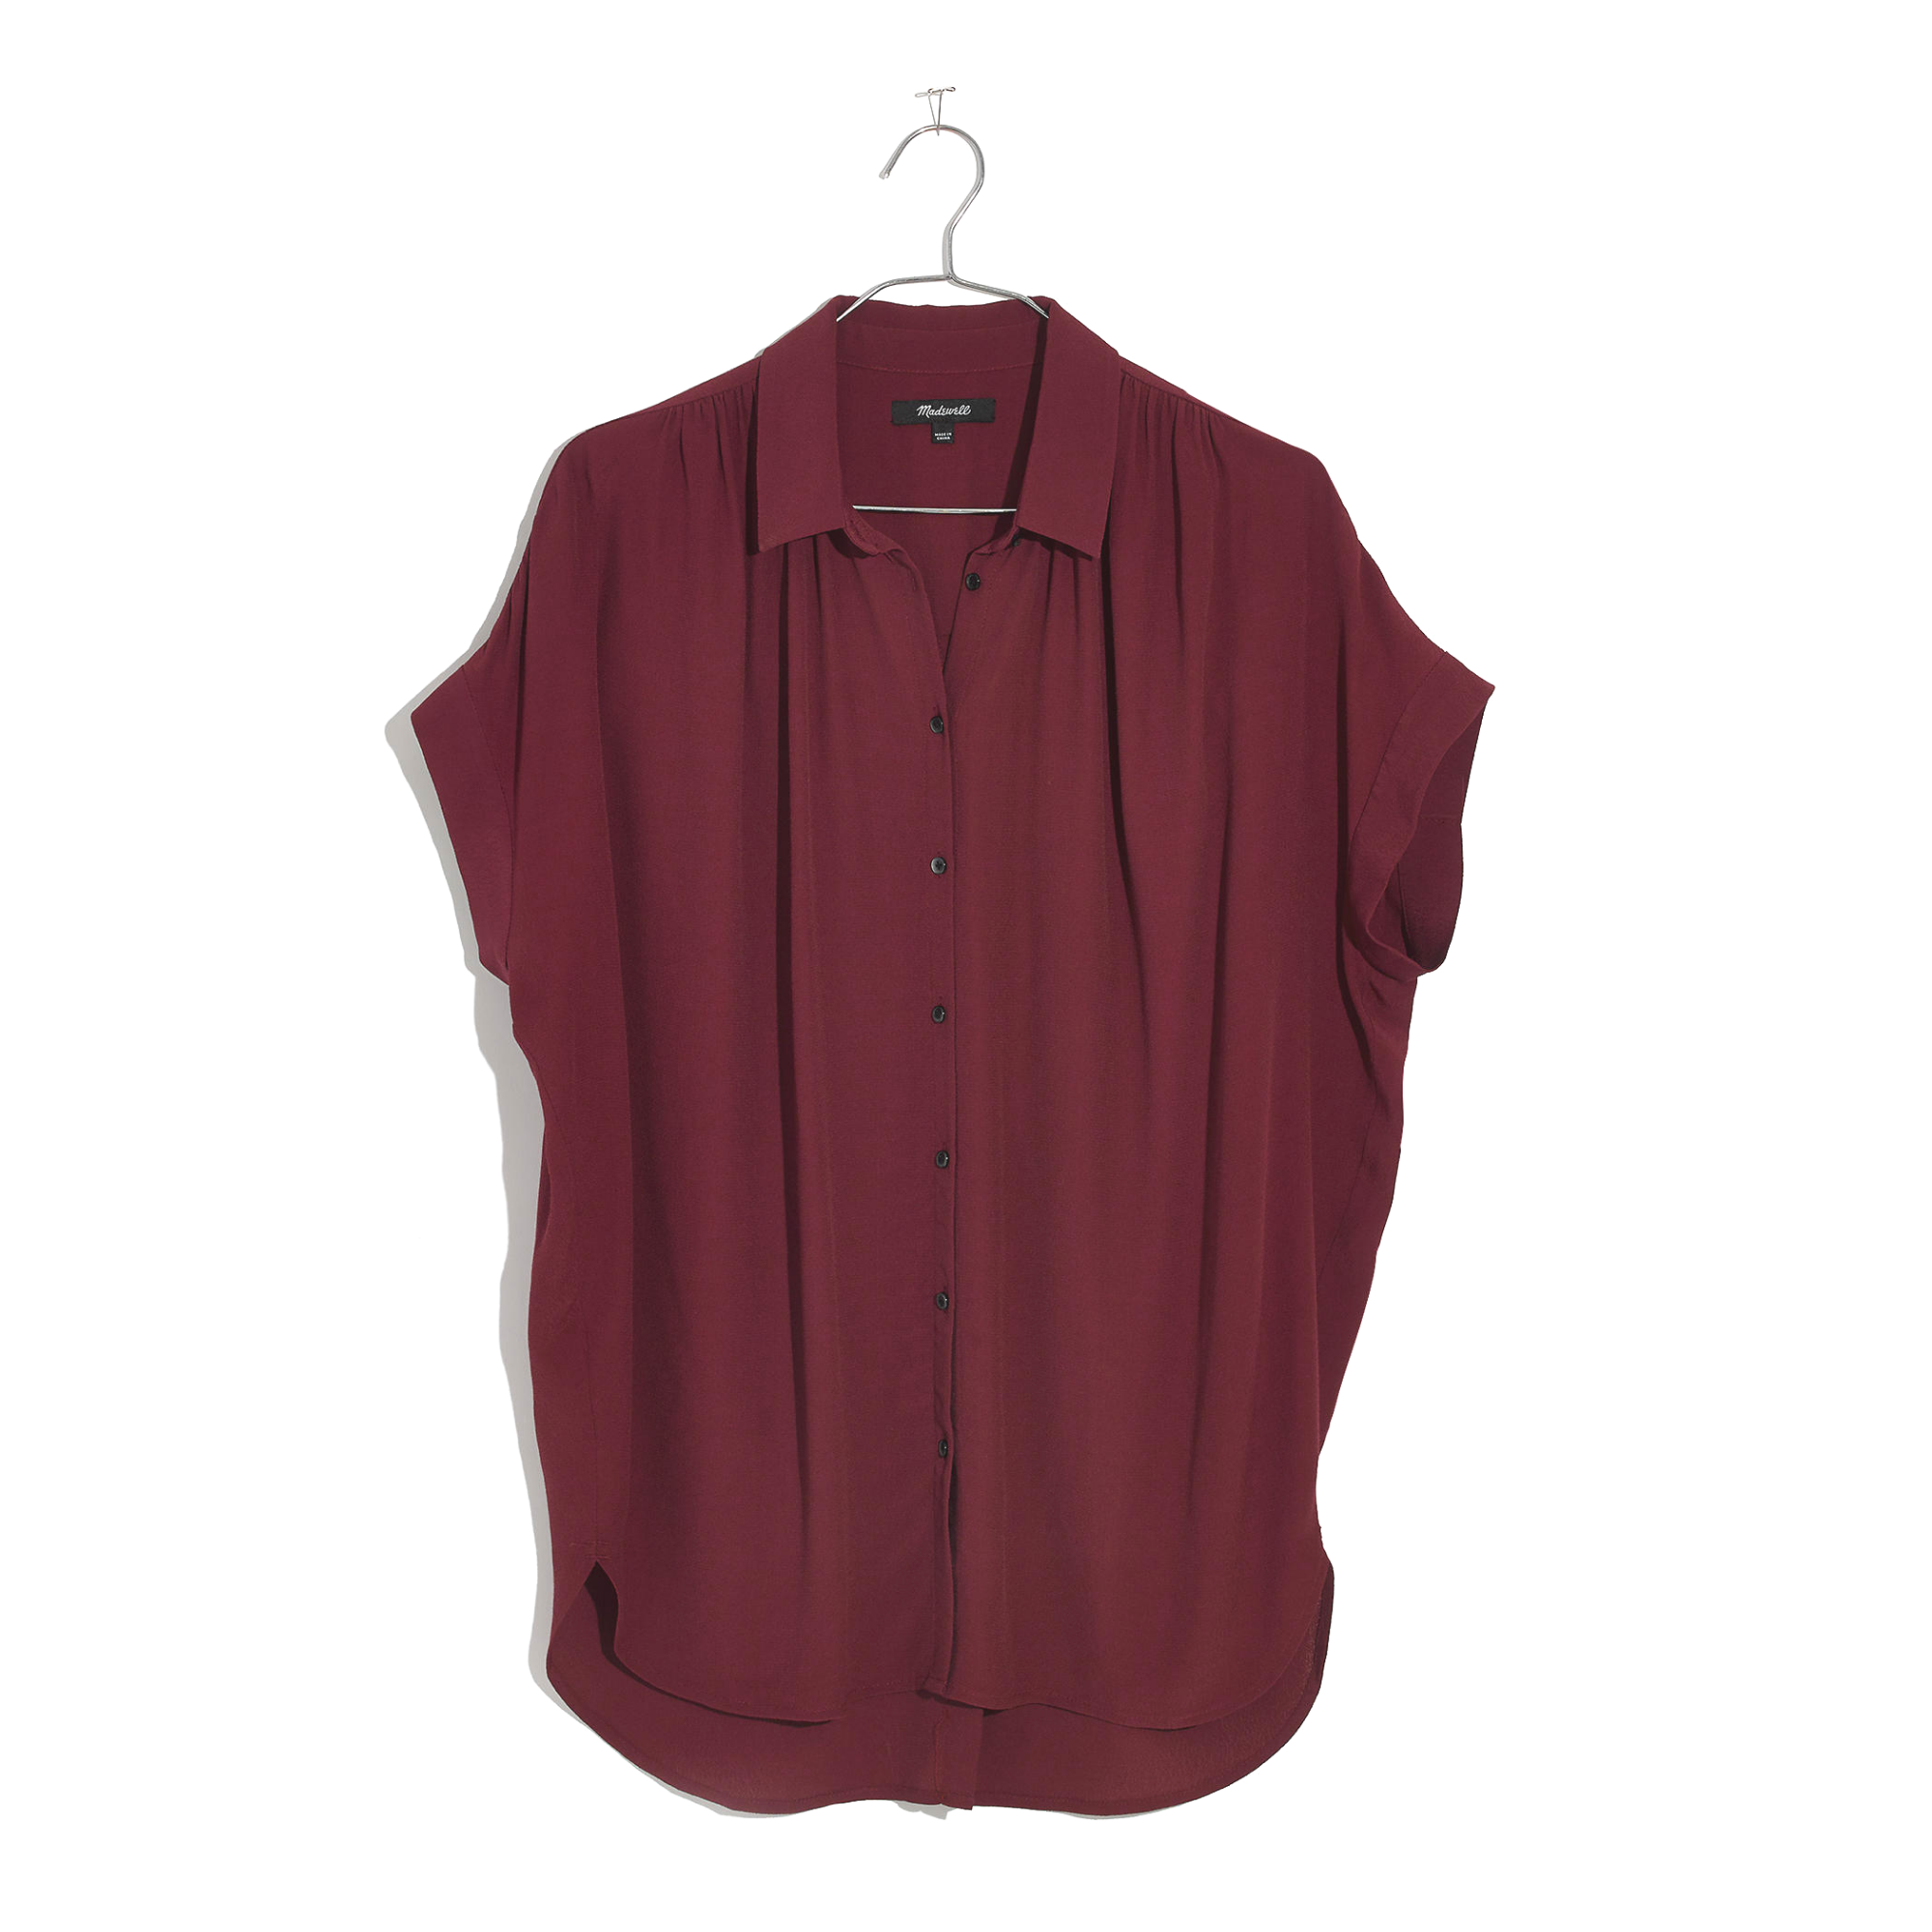 Madewell Central Drapey Shirt in Dusty Burgundy